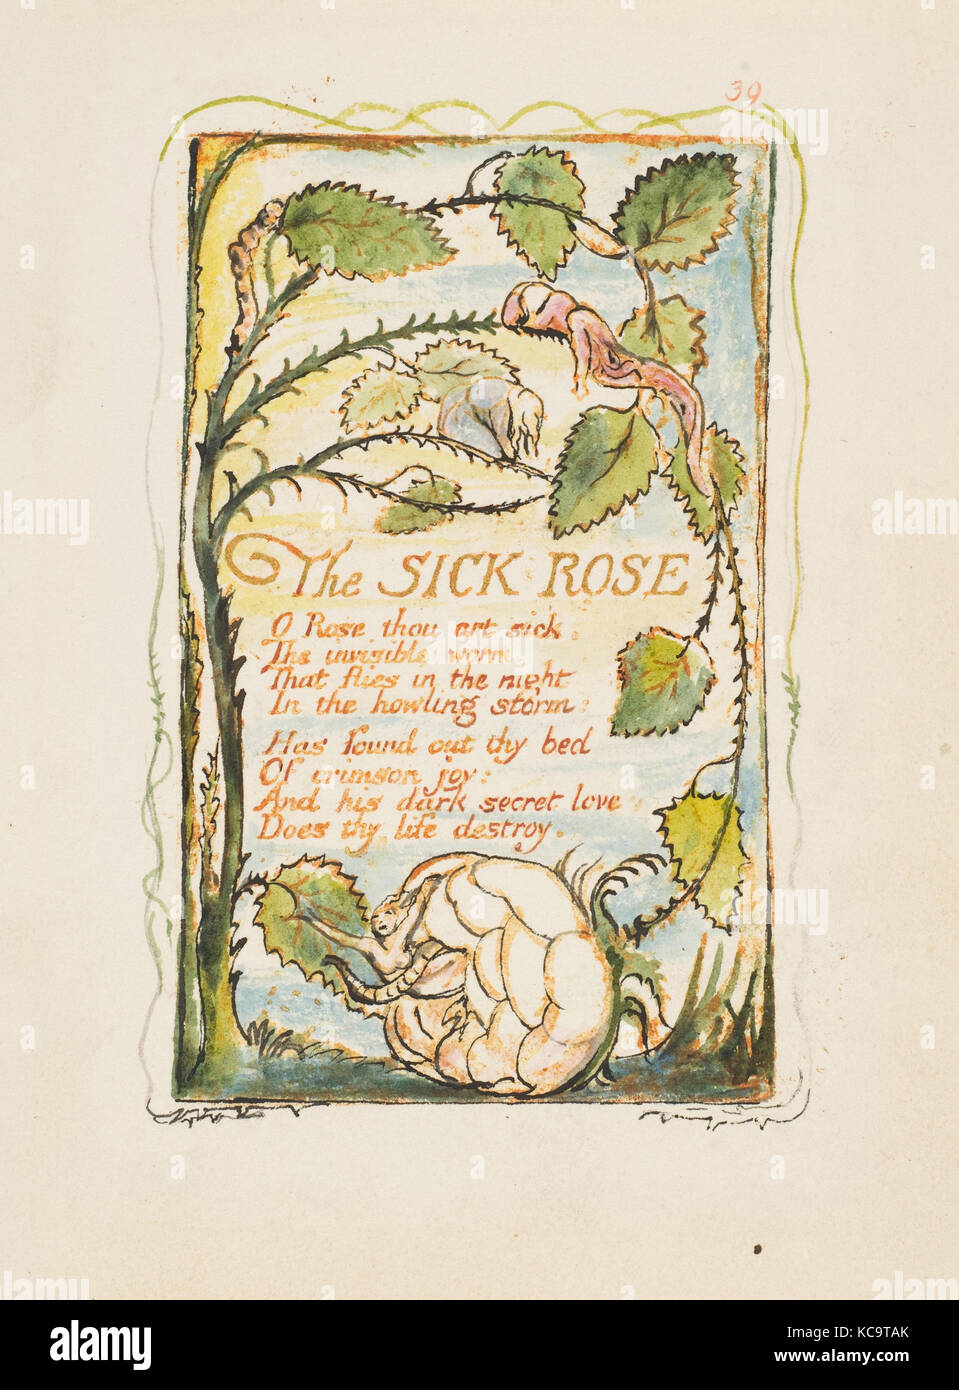 Songs of Innocence and of Experience: The Sick Rose, William Blake, ca. 1825 Stock Photo